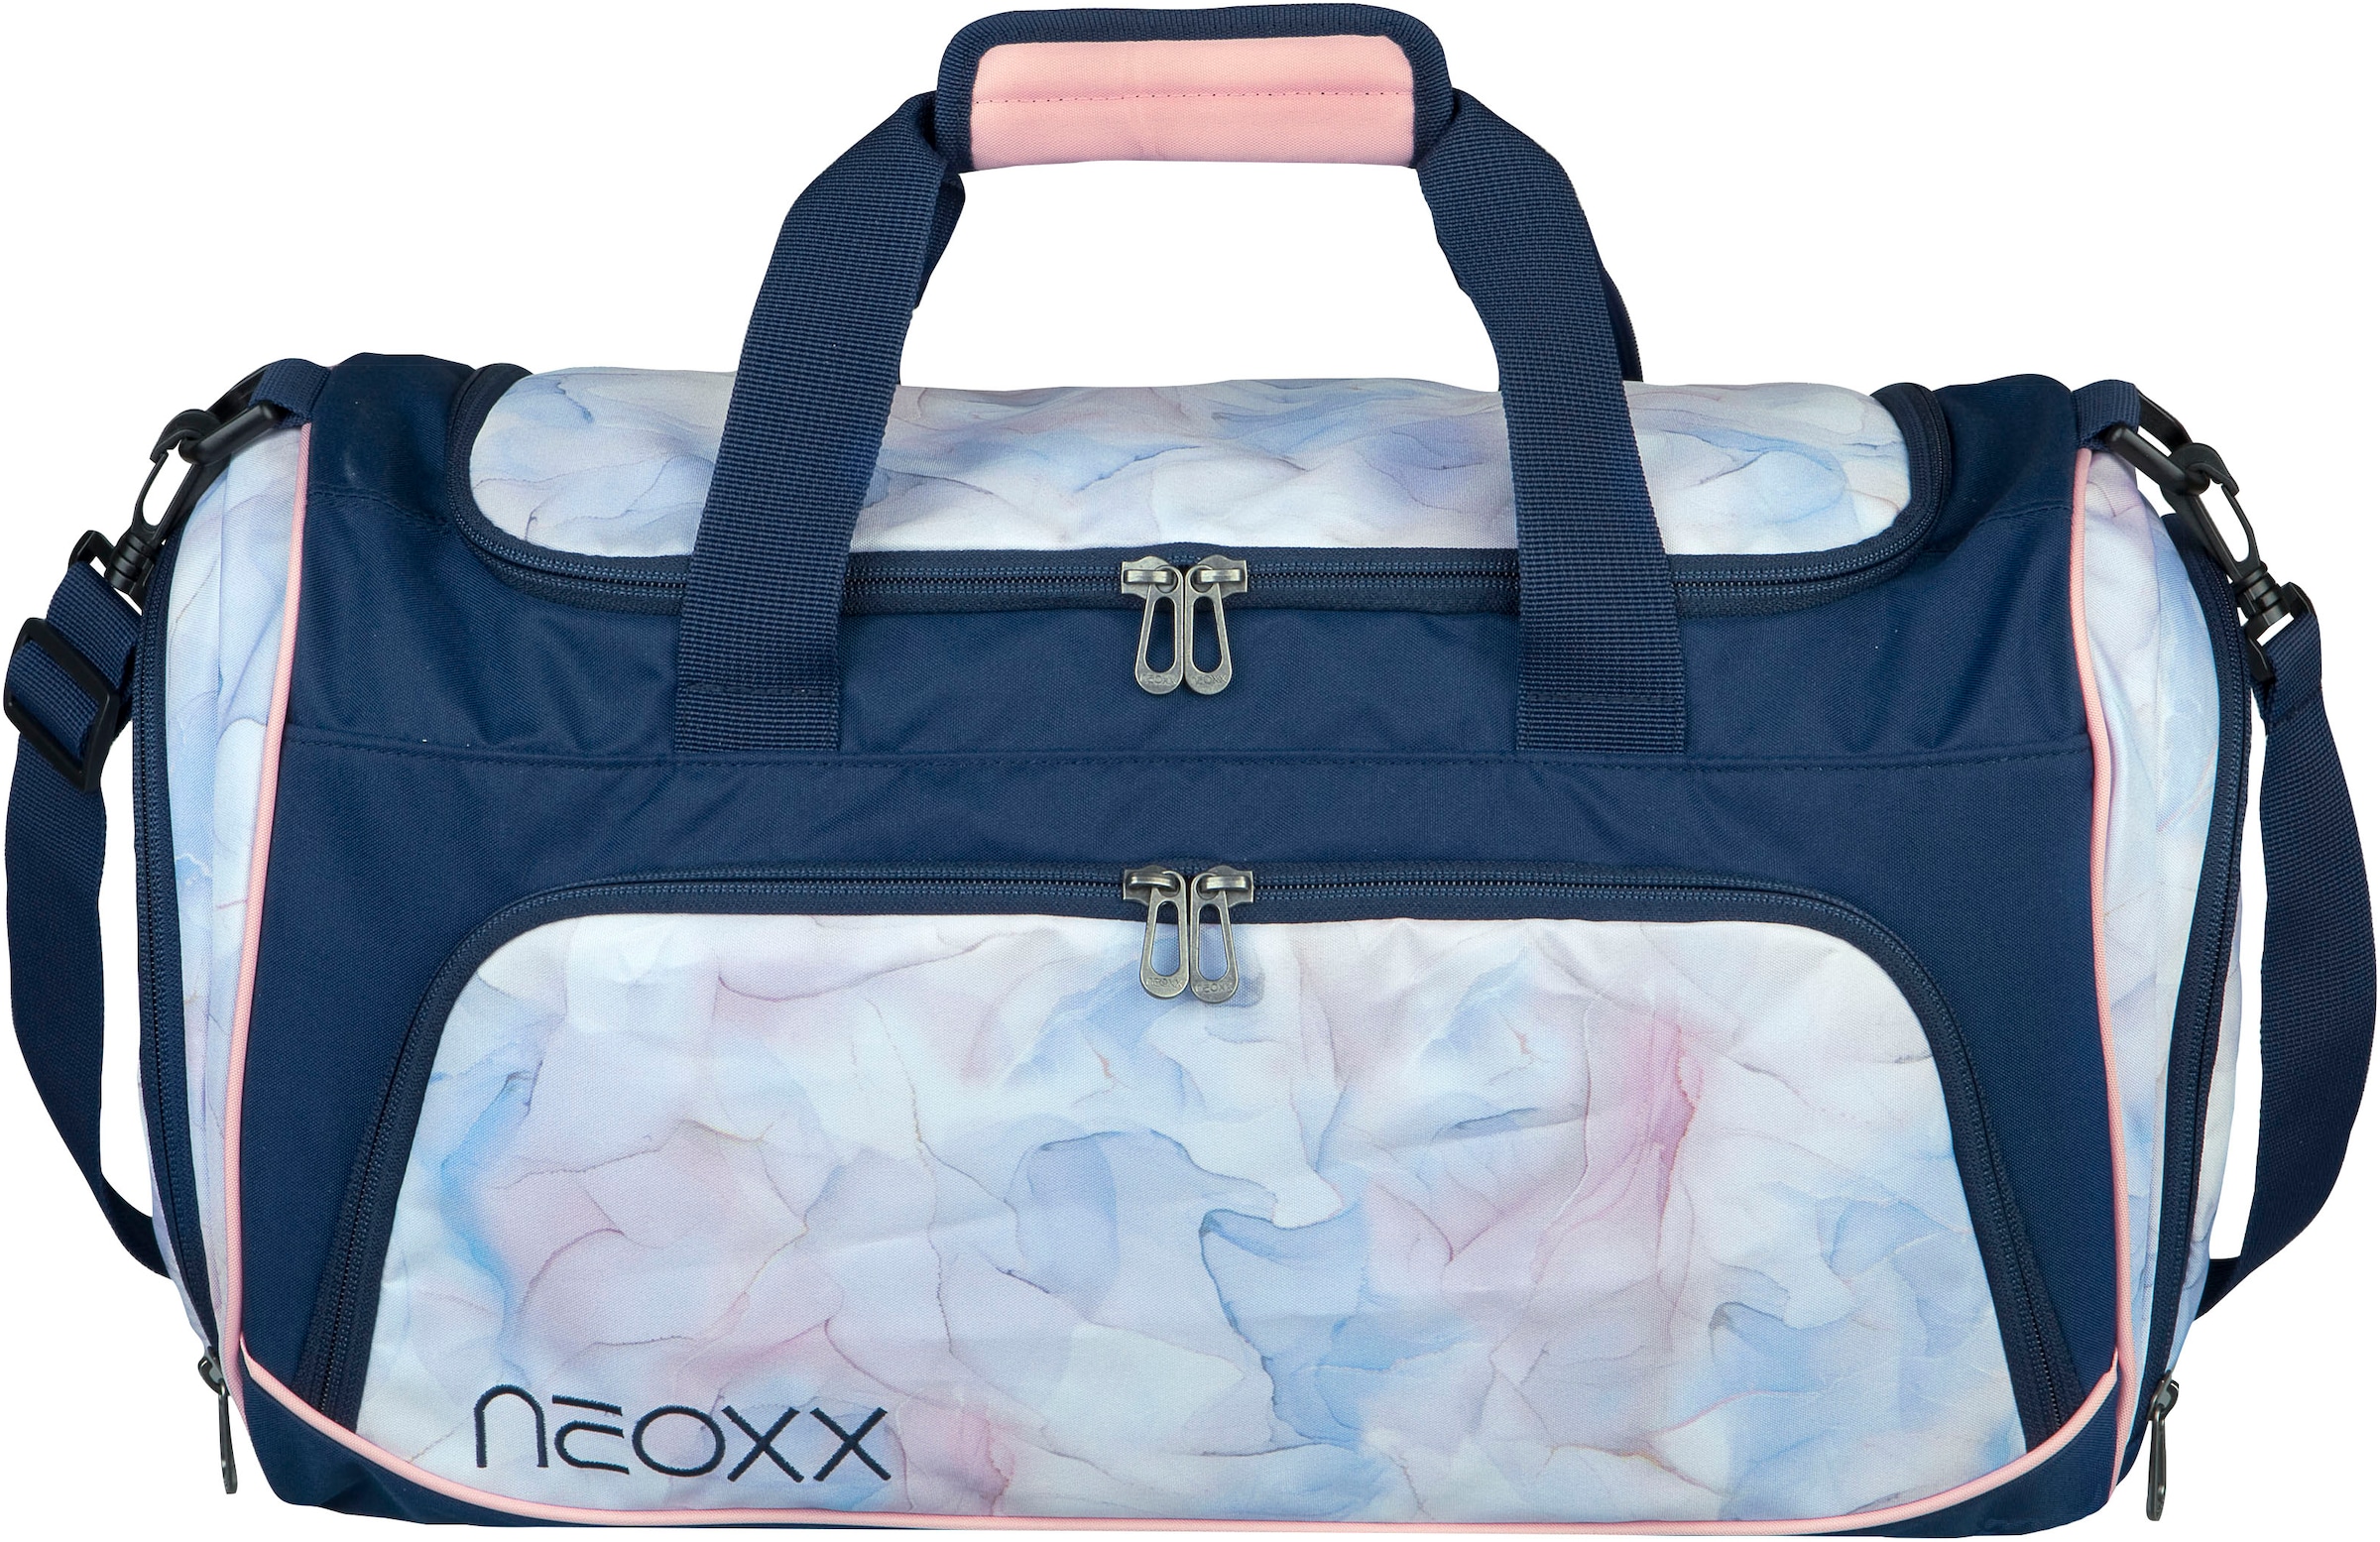 neoxx Sporttasche »Move, Dreaming of Pastel«, teilweise aus recyceltem Material